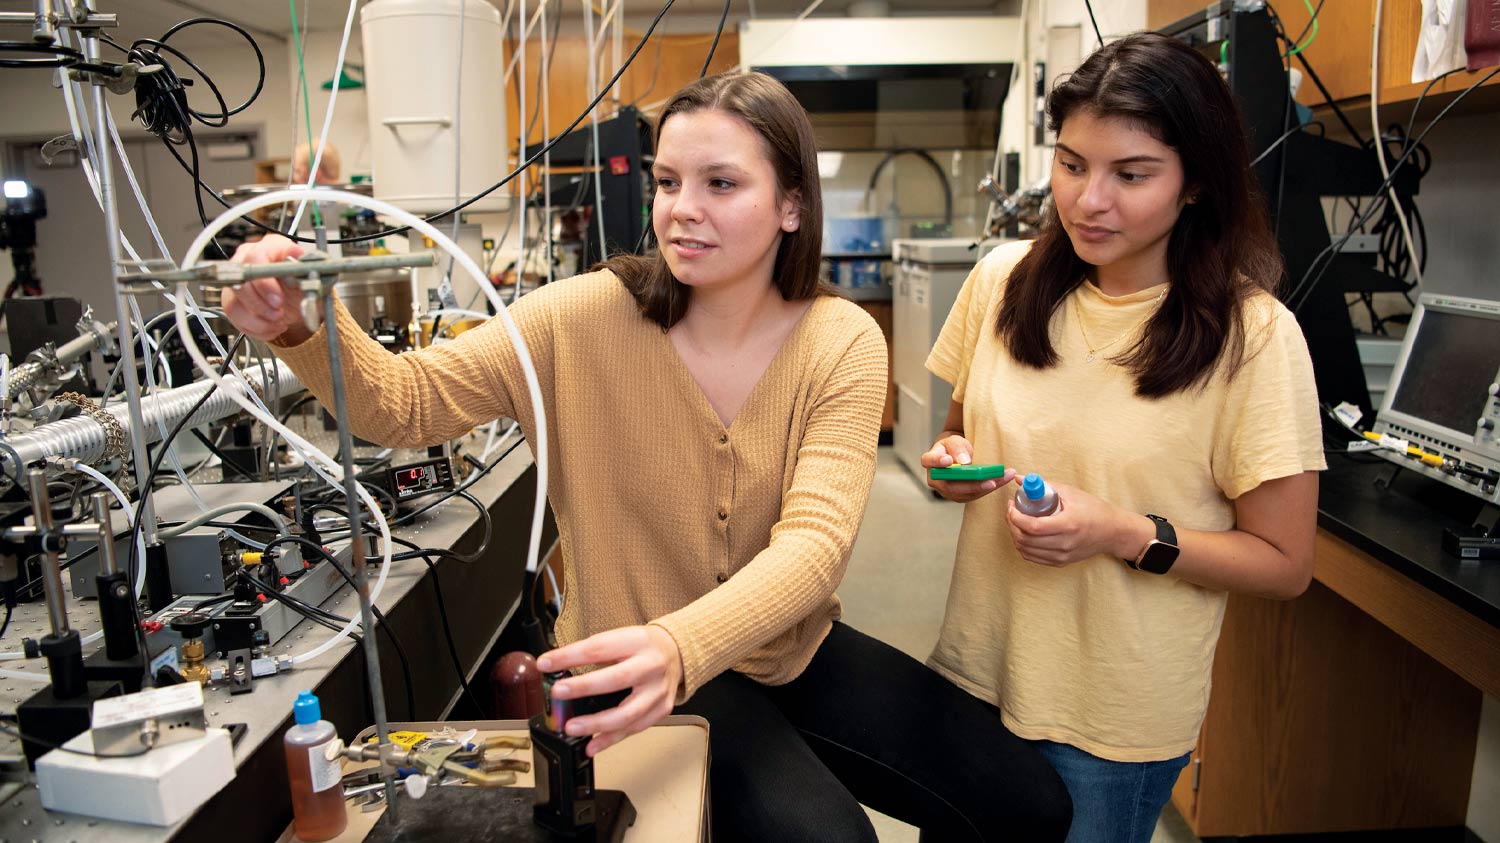 Jewel Cook '20 (left) and Ana Islas '20 connect an e-cigarette to a testing apparatus.